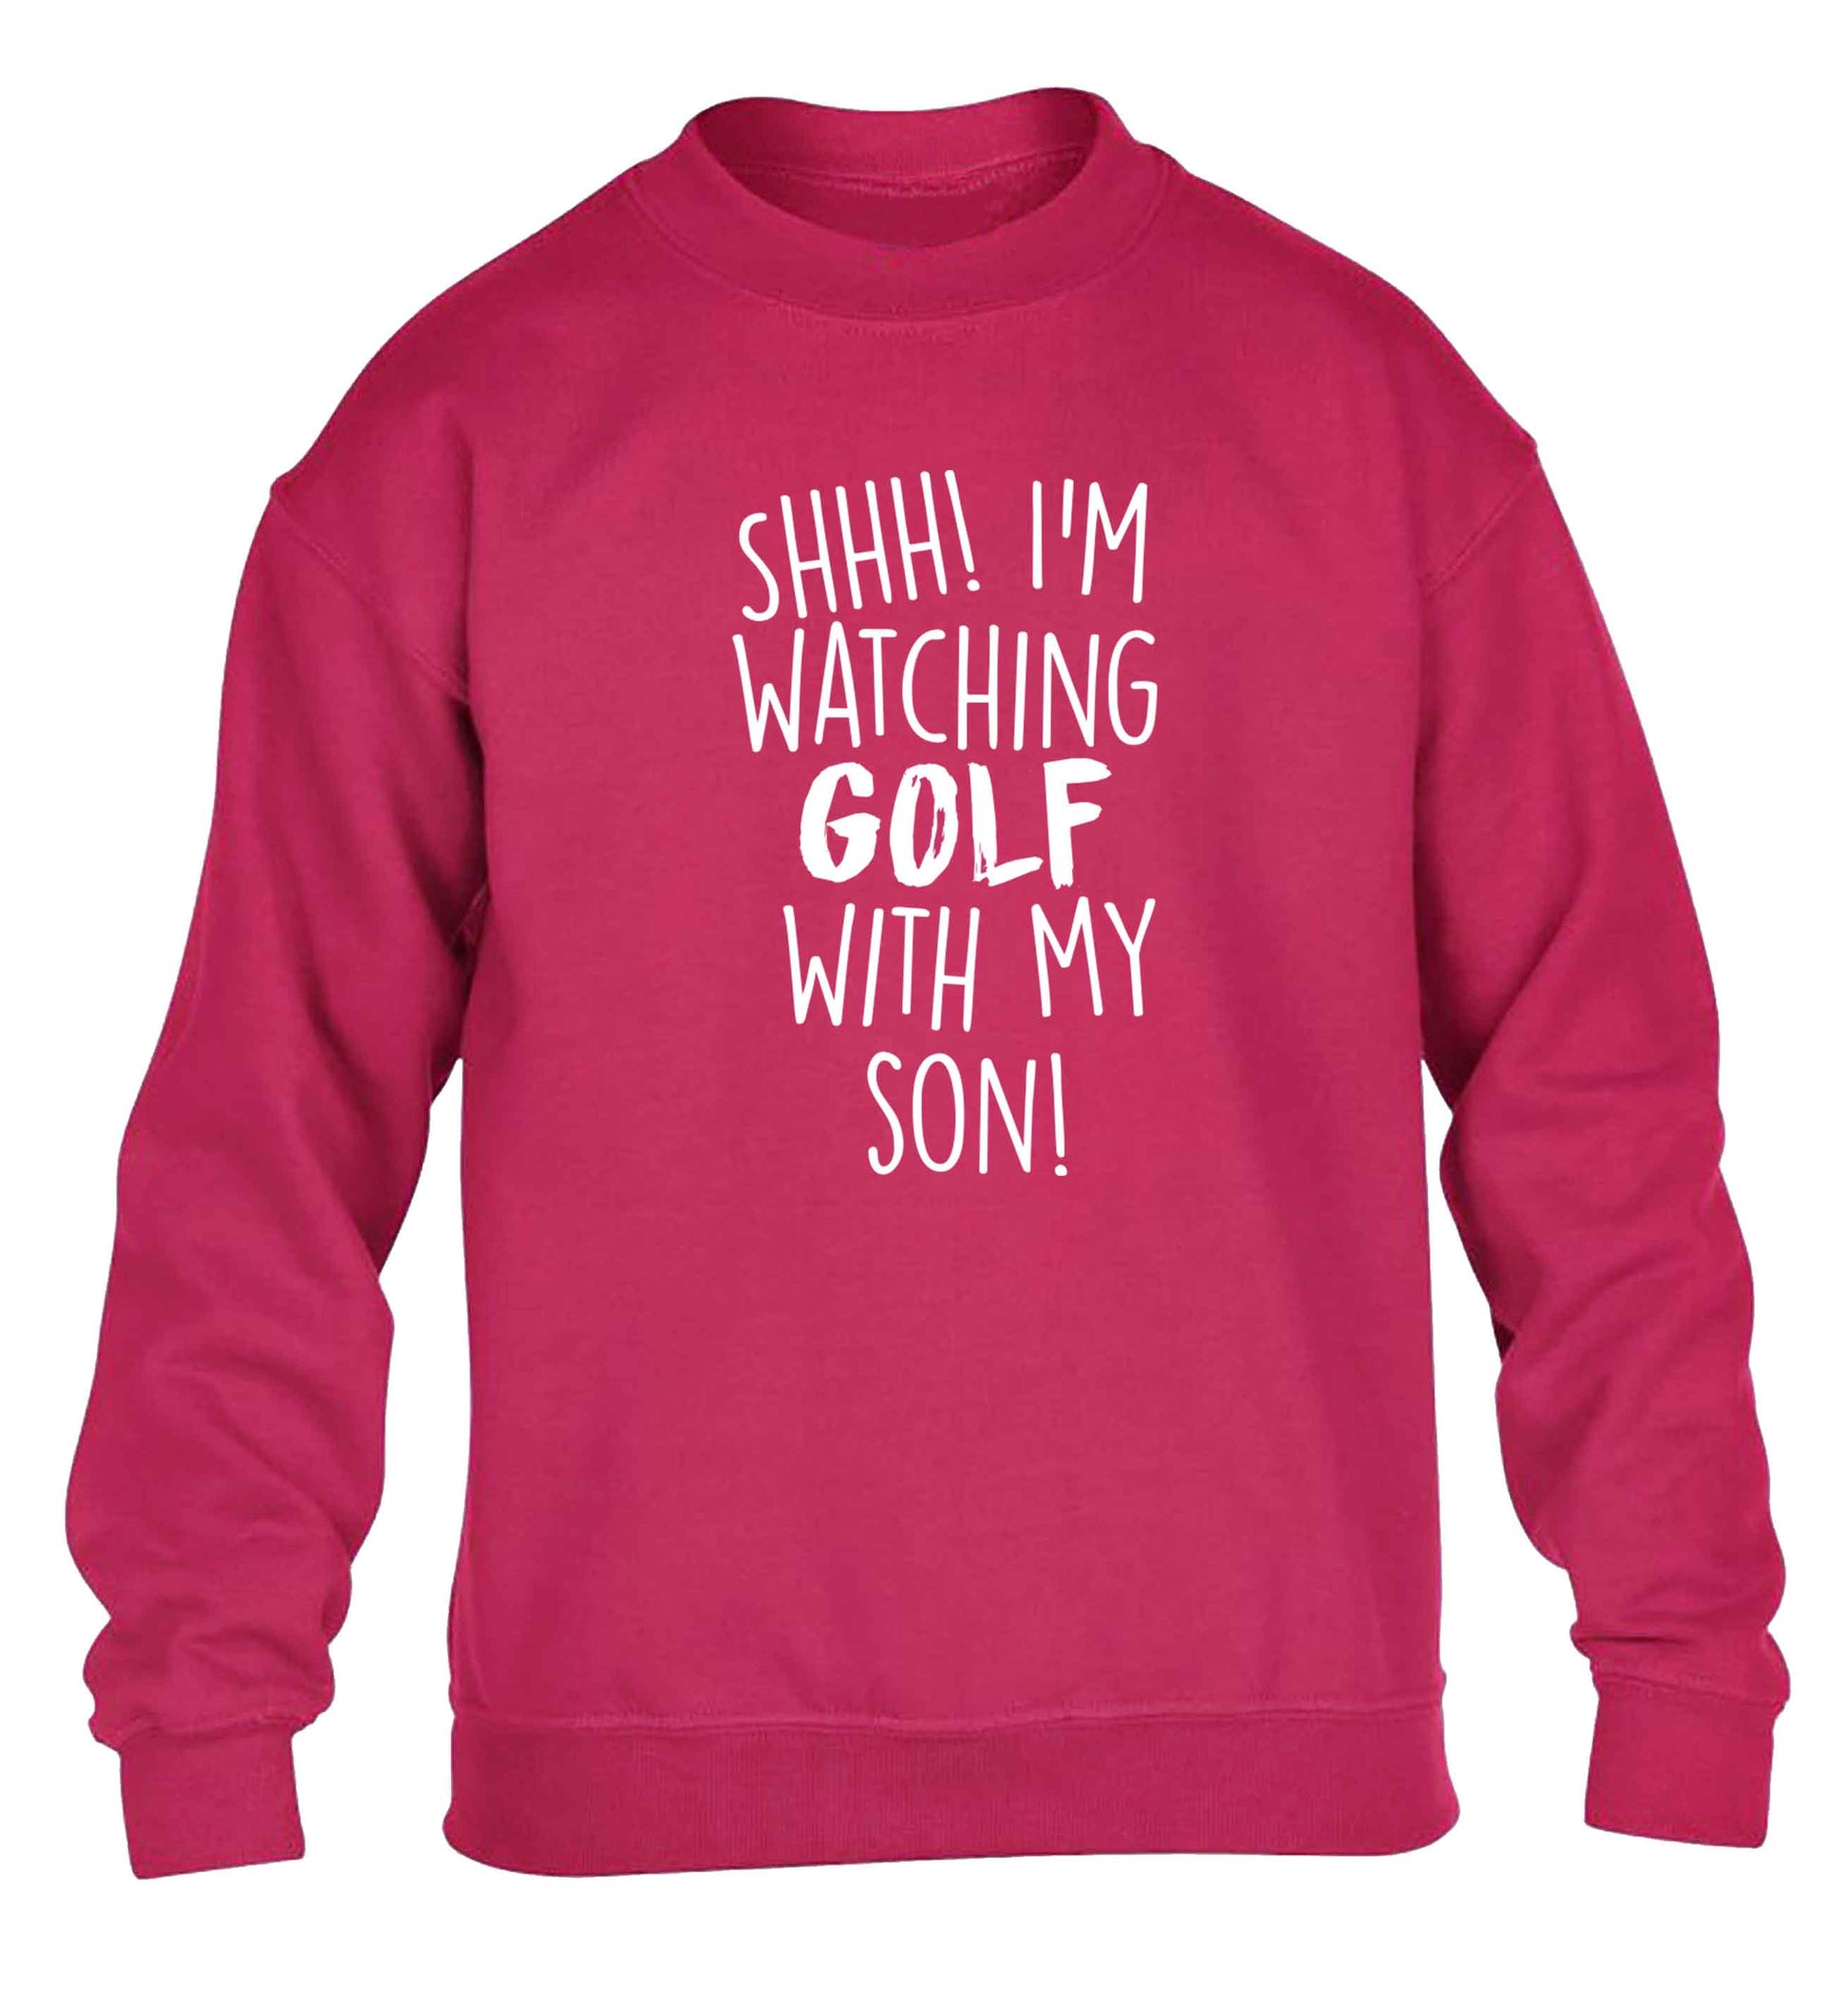 Shh I'm watching golf with my son children's pink sweater 12-13 Years